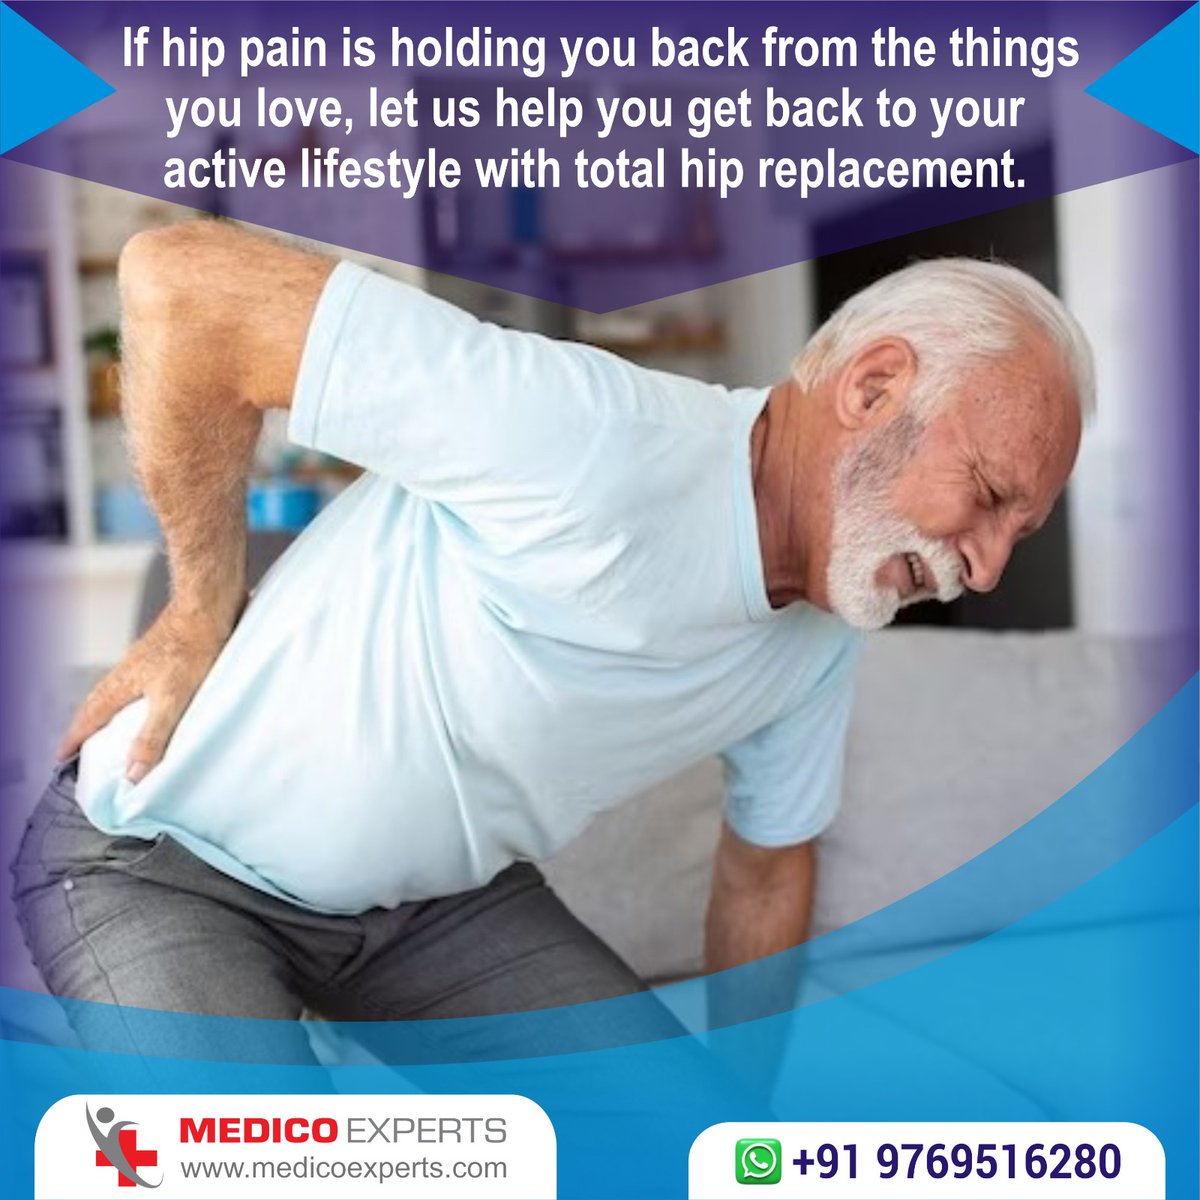 Get rid of hip pain with advanced hip replacement surgery in India 
Know More : medicoexperts.com/total-hip-repl… 
#HipPain #HipPainTreatment #Ortho #Orthopaedics #BestDoctors #MedicoExperts